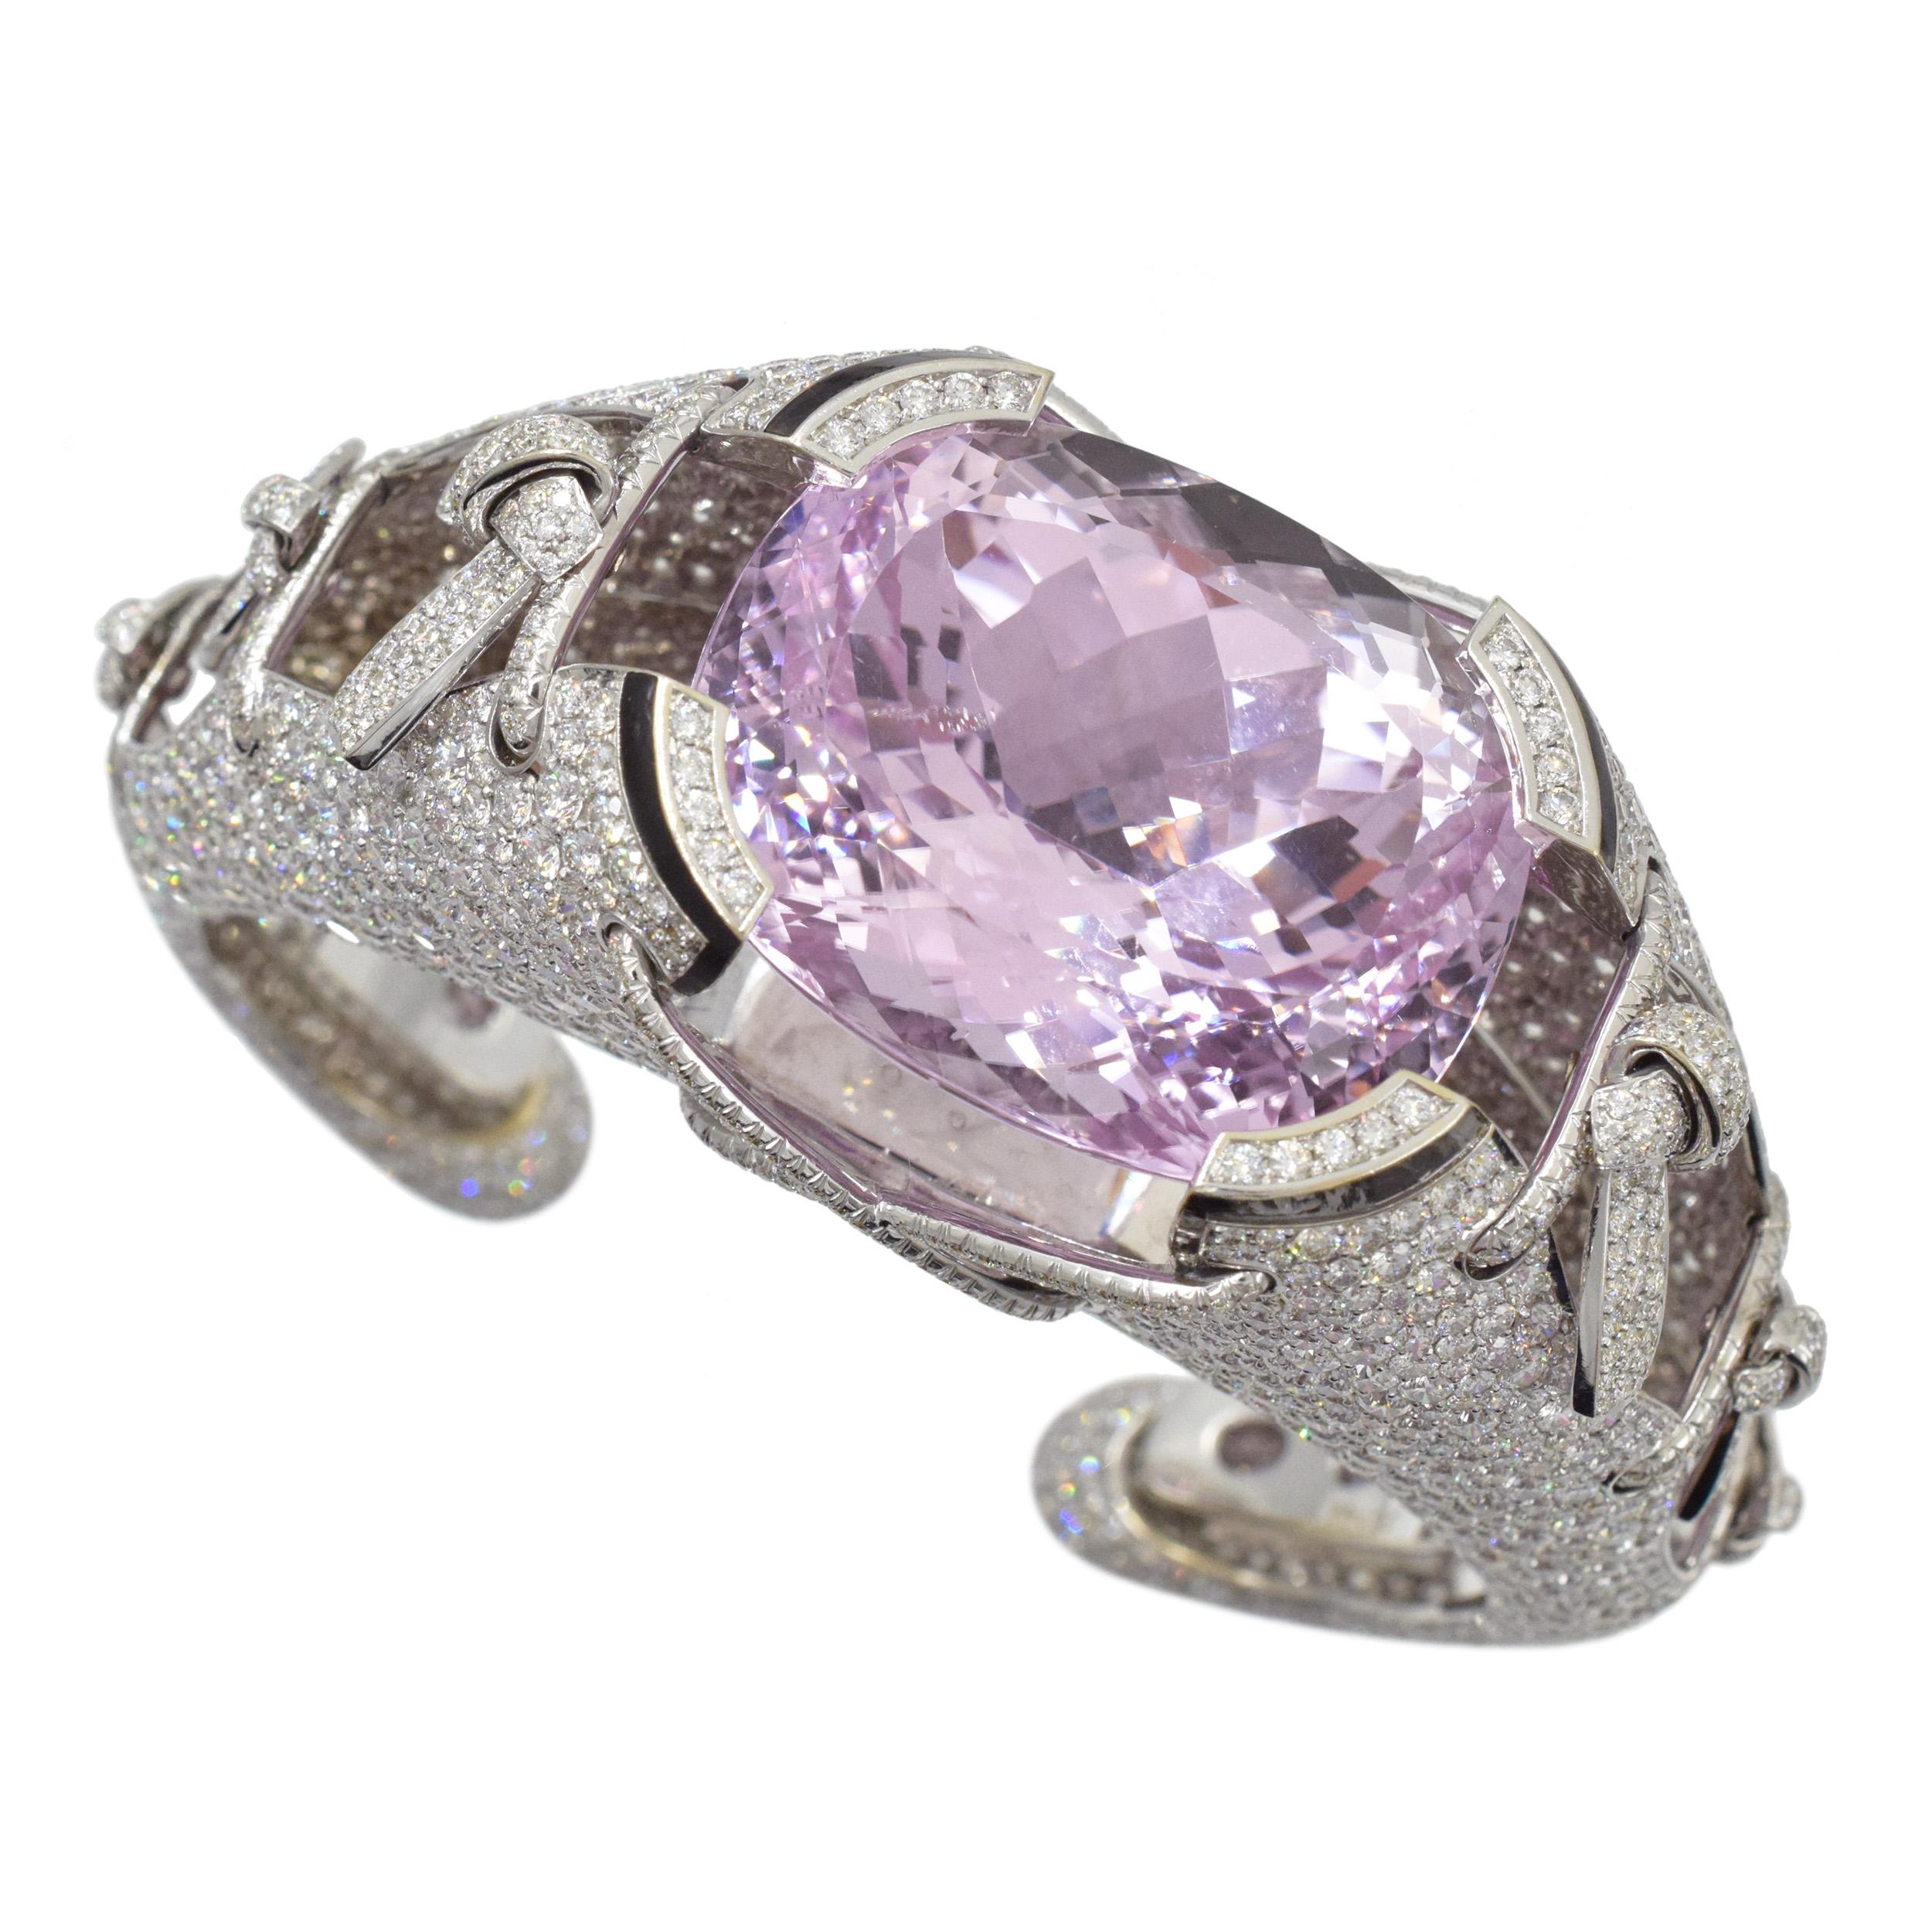 Impressive Kunzite and diamond and enamel cuff bracelet in 18k white gold. Center of this bracelet set with cushion shaped kunzite measuring approximately 27.5mm by 32.2mm (approx. 160 carats). 
The bracelet is fully encrusted with round brilliant